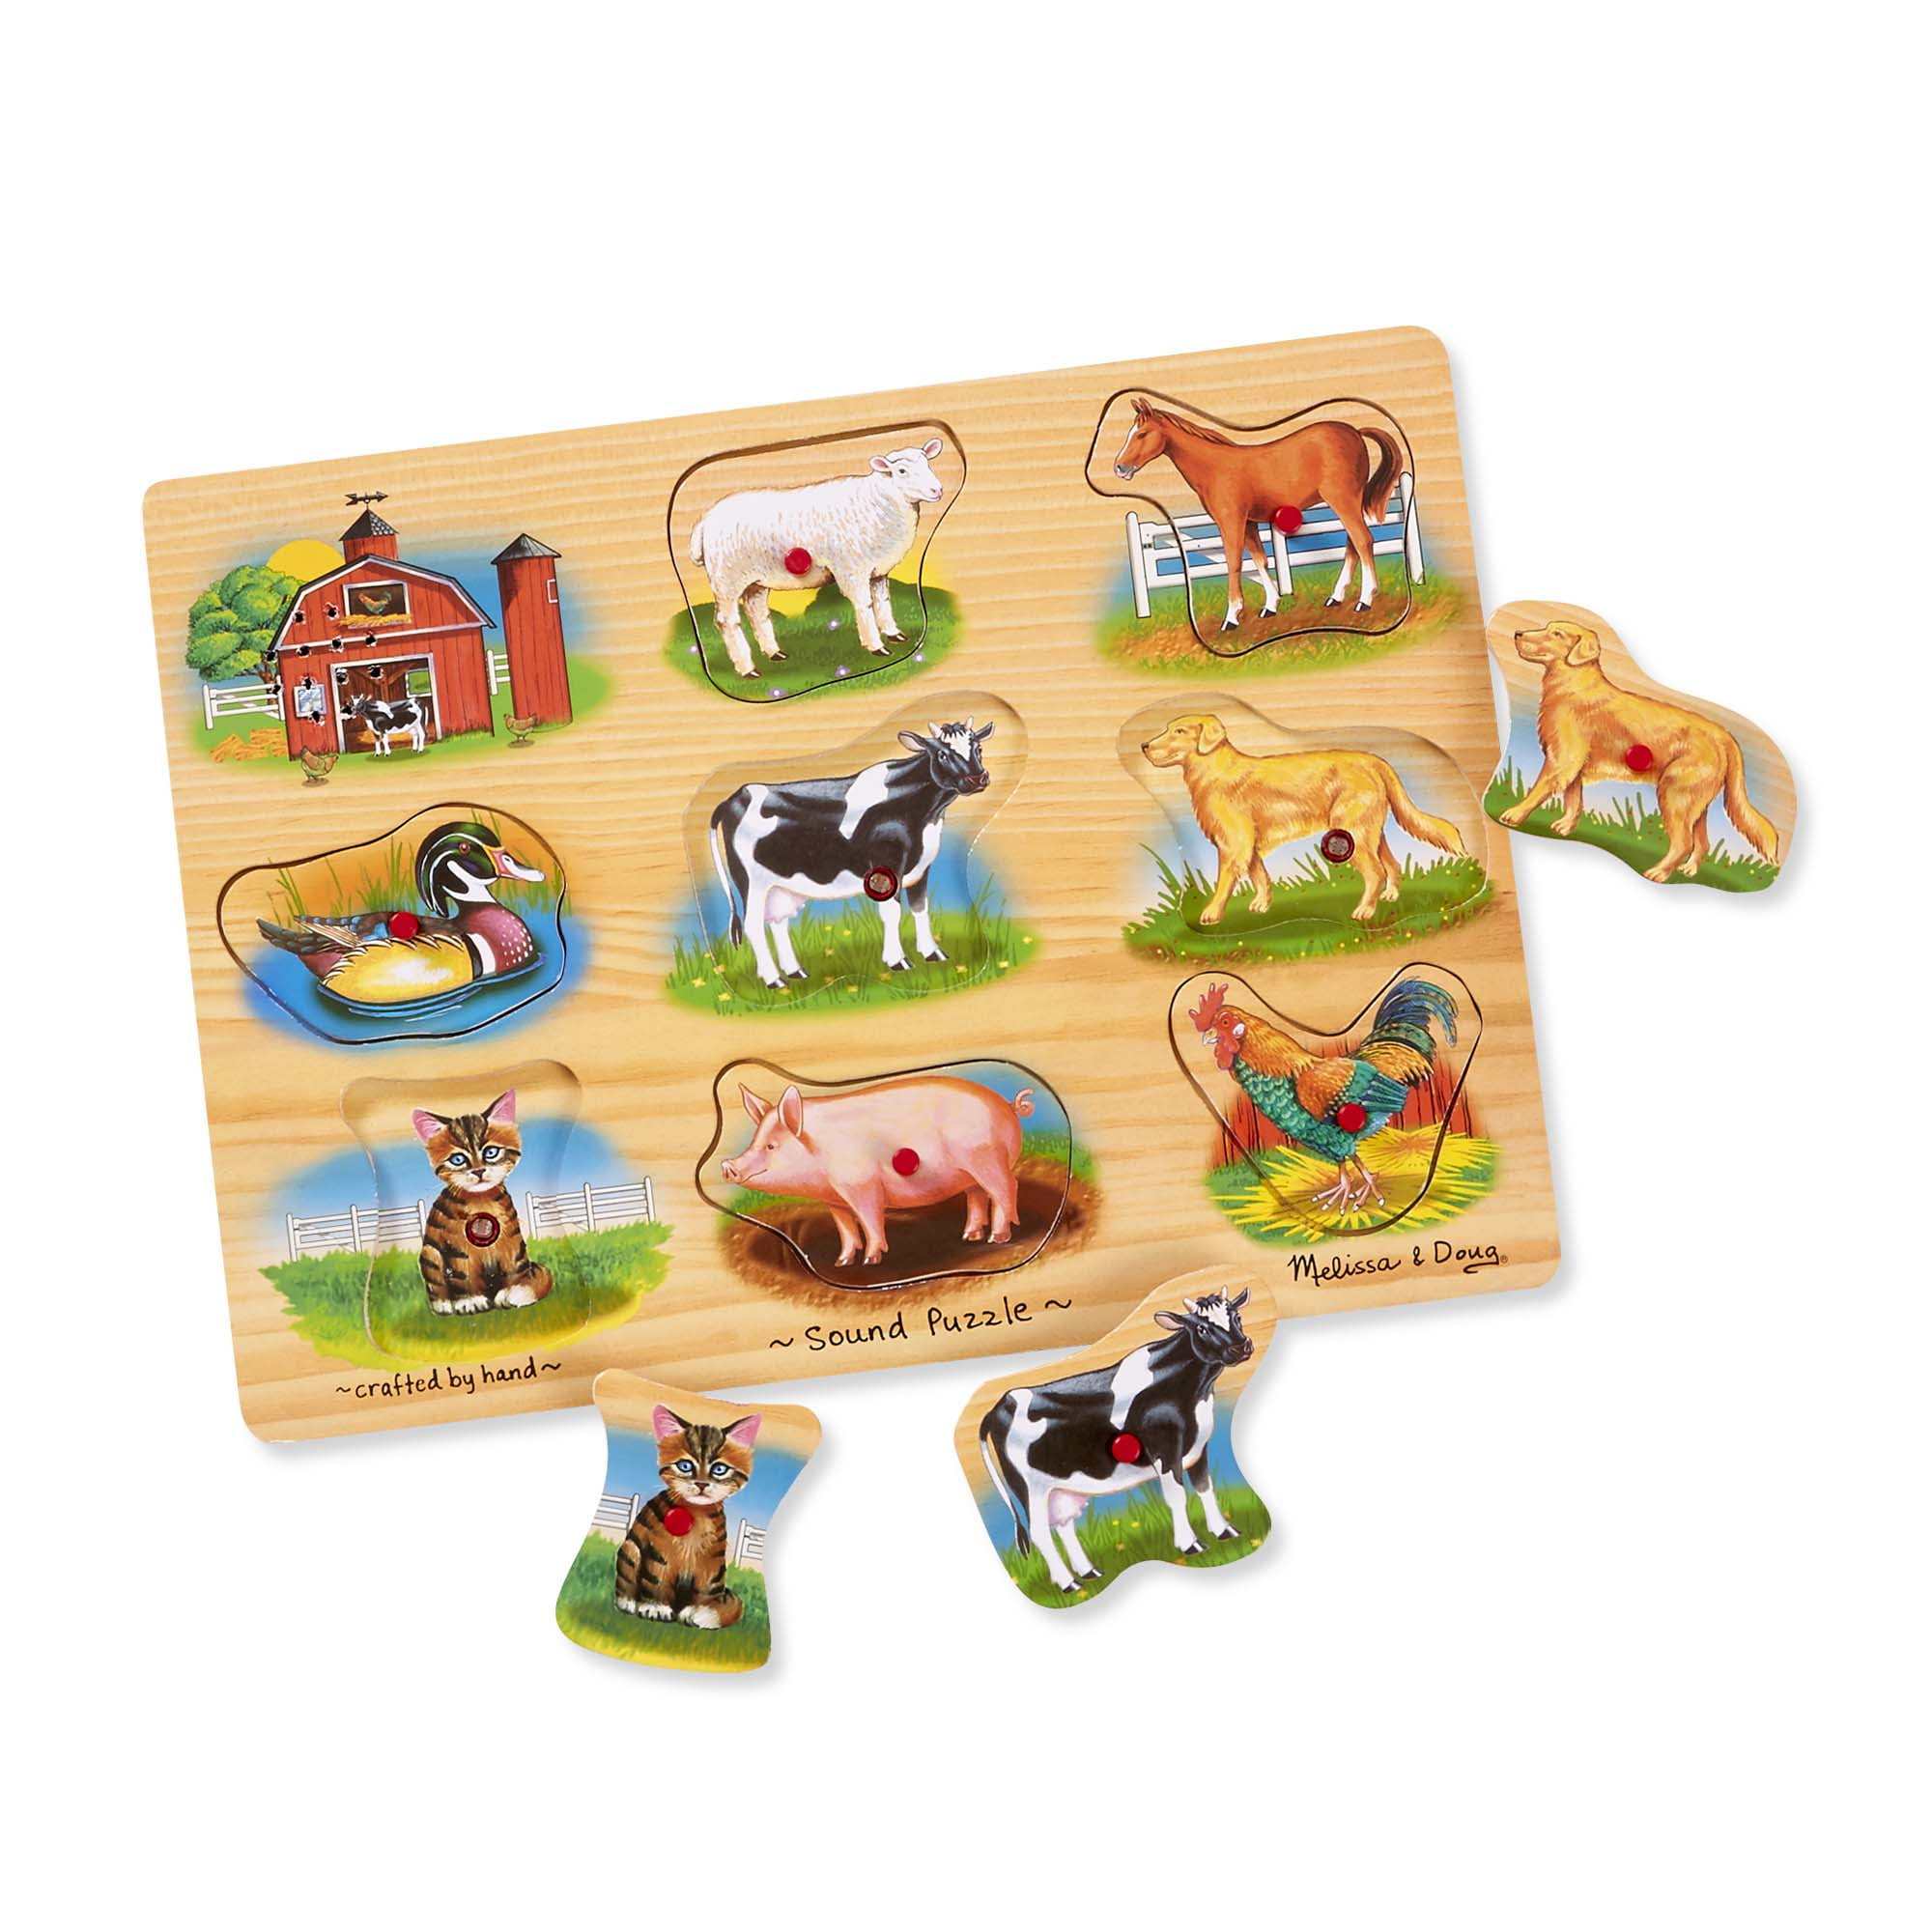 Choose from 3 Melissa & Doug Wooden Peg Animal Puzzles w/ Pics under Pieces 